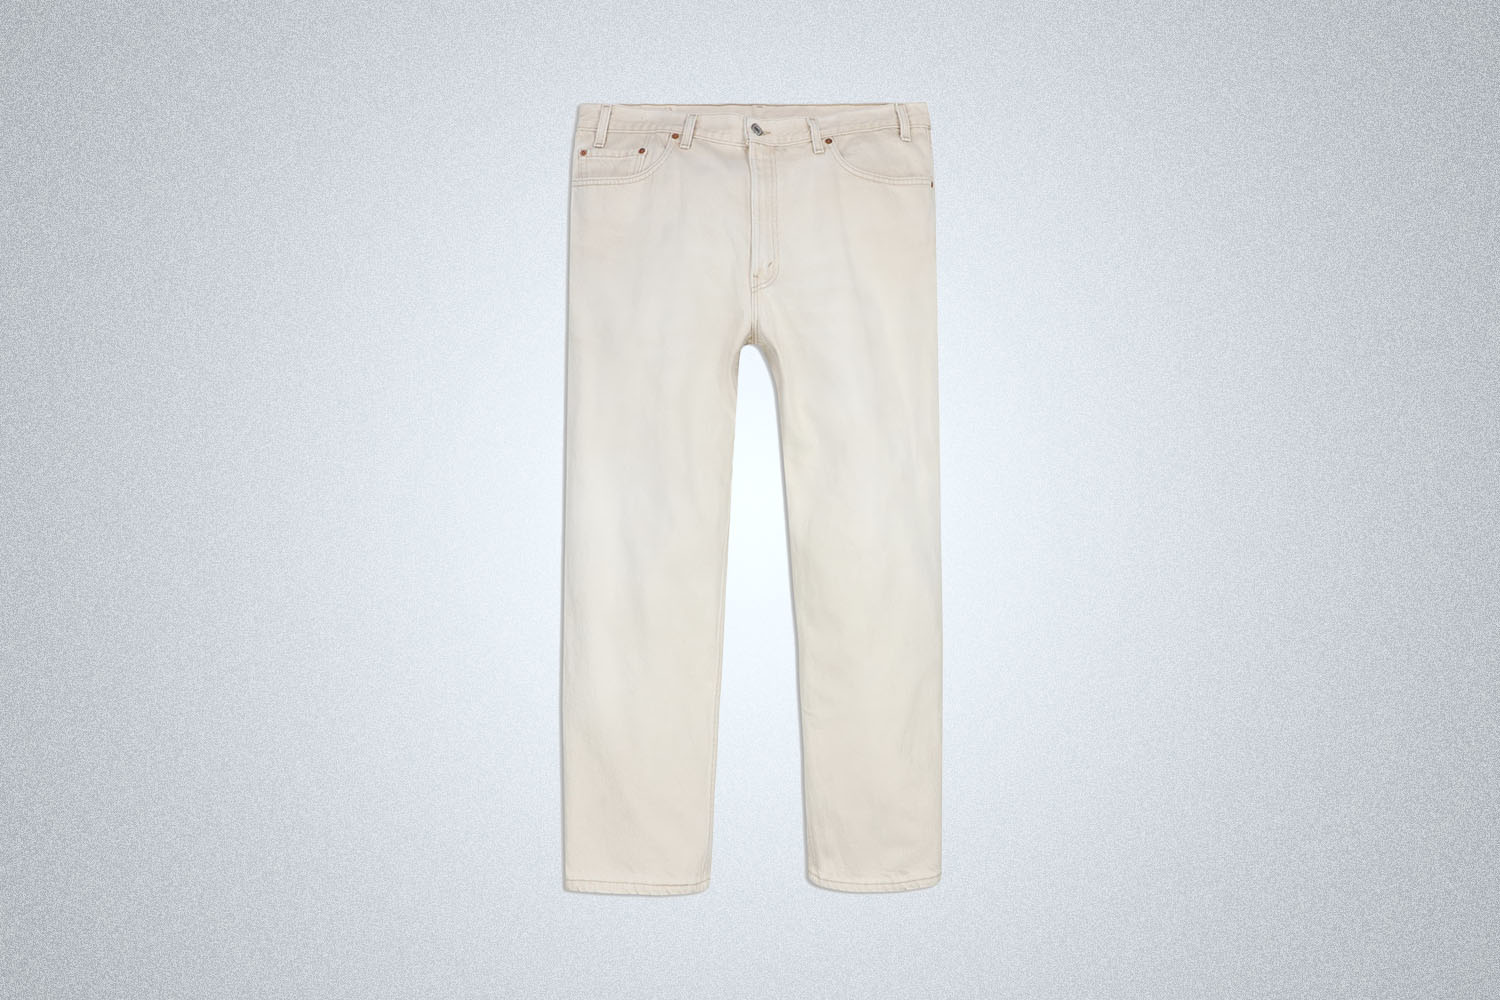 The Levis 501 White Jeans on a gray background